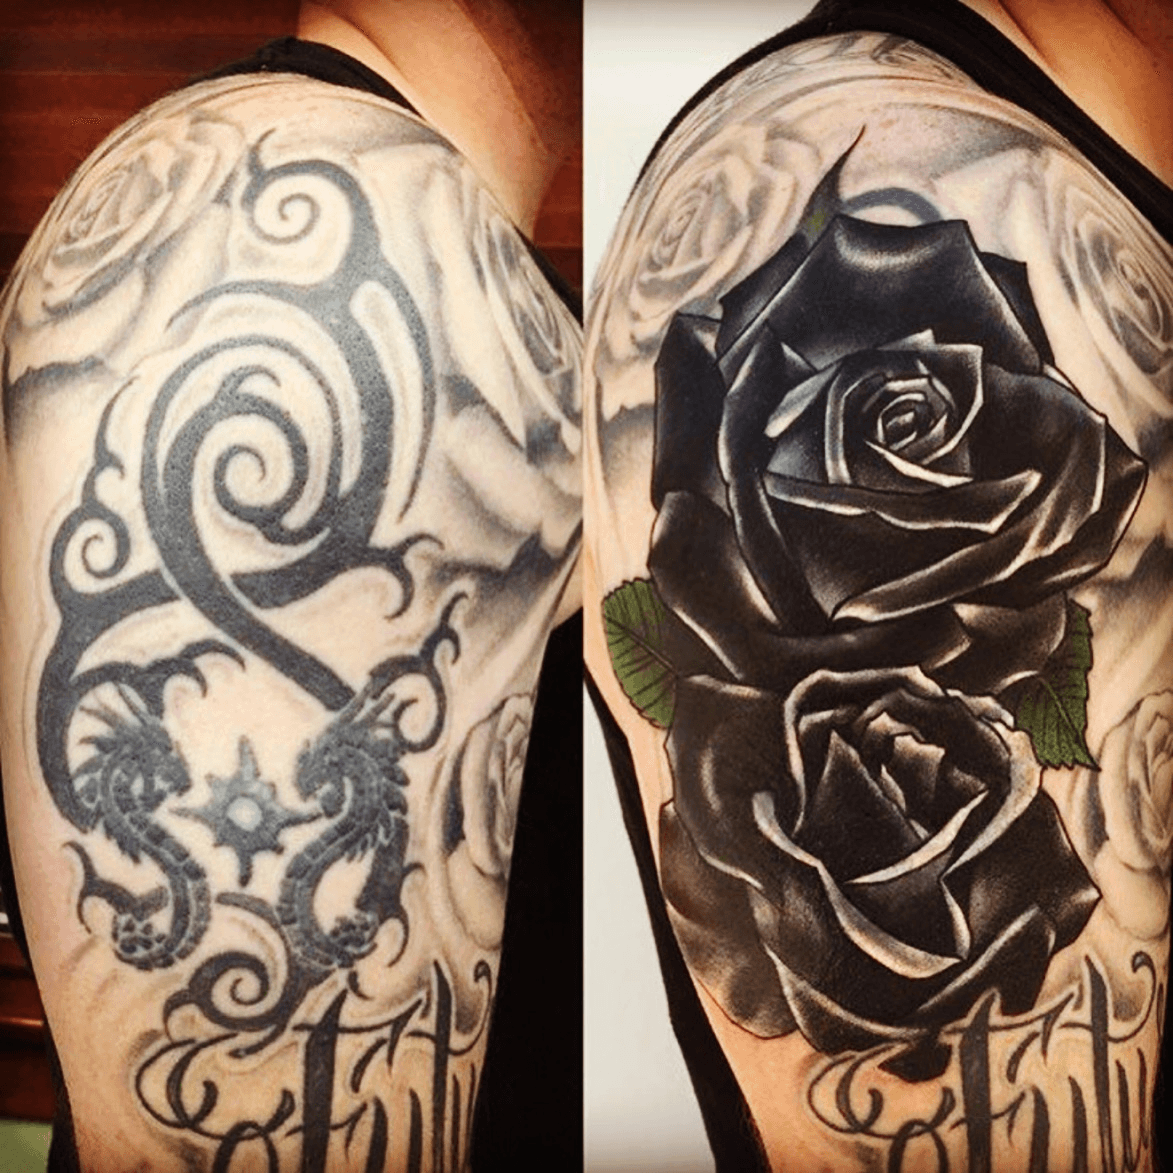 Tattoo Uploaded By Steve I Would Love To Have This As Cover Up On My Upper Arm As My Dream Tattoo Done By Mydreamtattoo Amijames Tattoodo